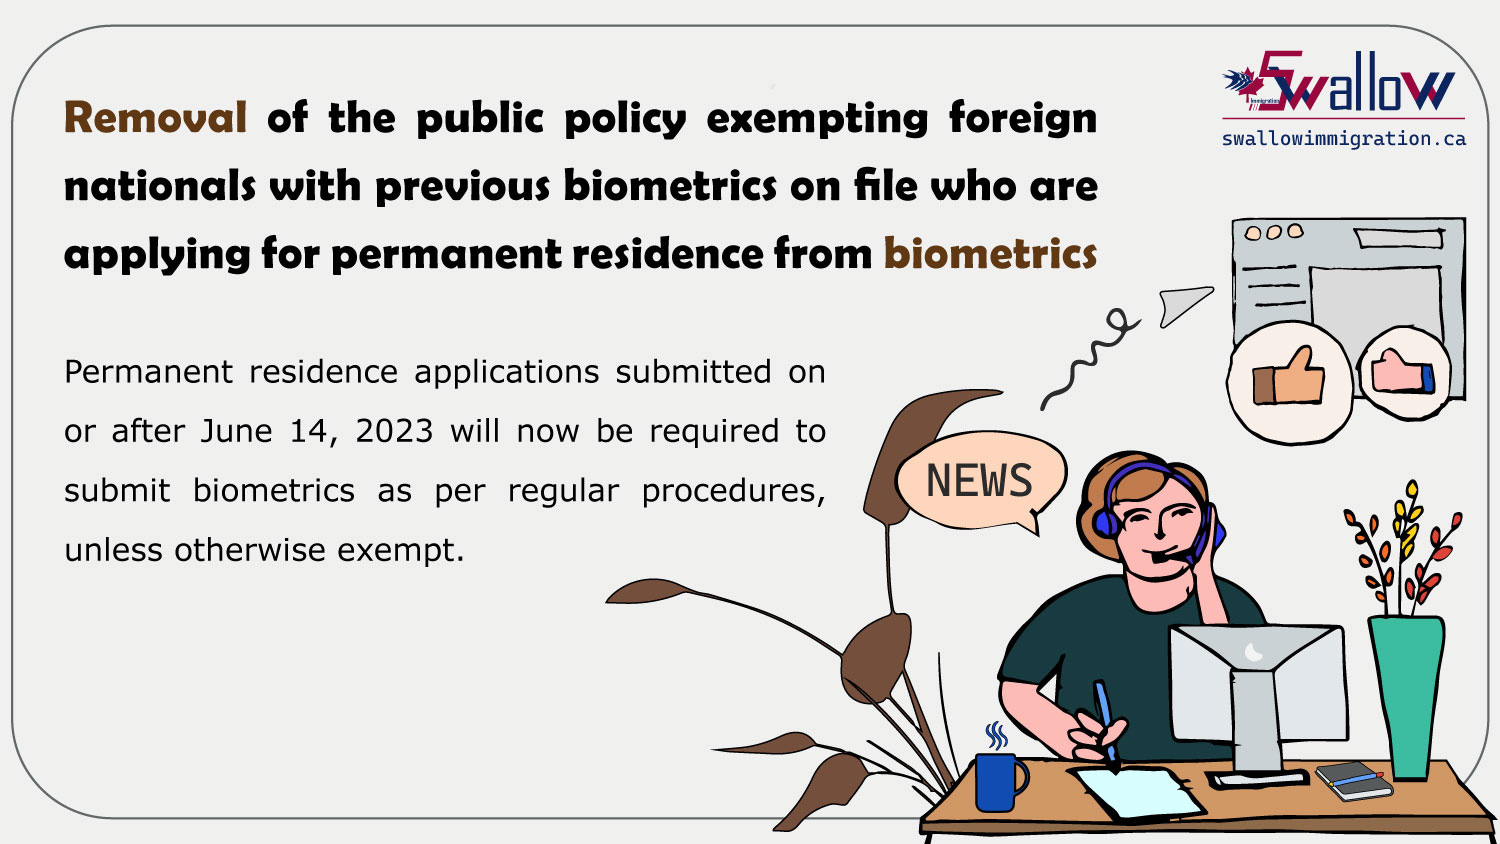 Removal of the public policy exempting foreign nationals with previous biometrics on file who are applying for permanent residence from biometrics